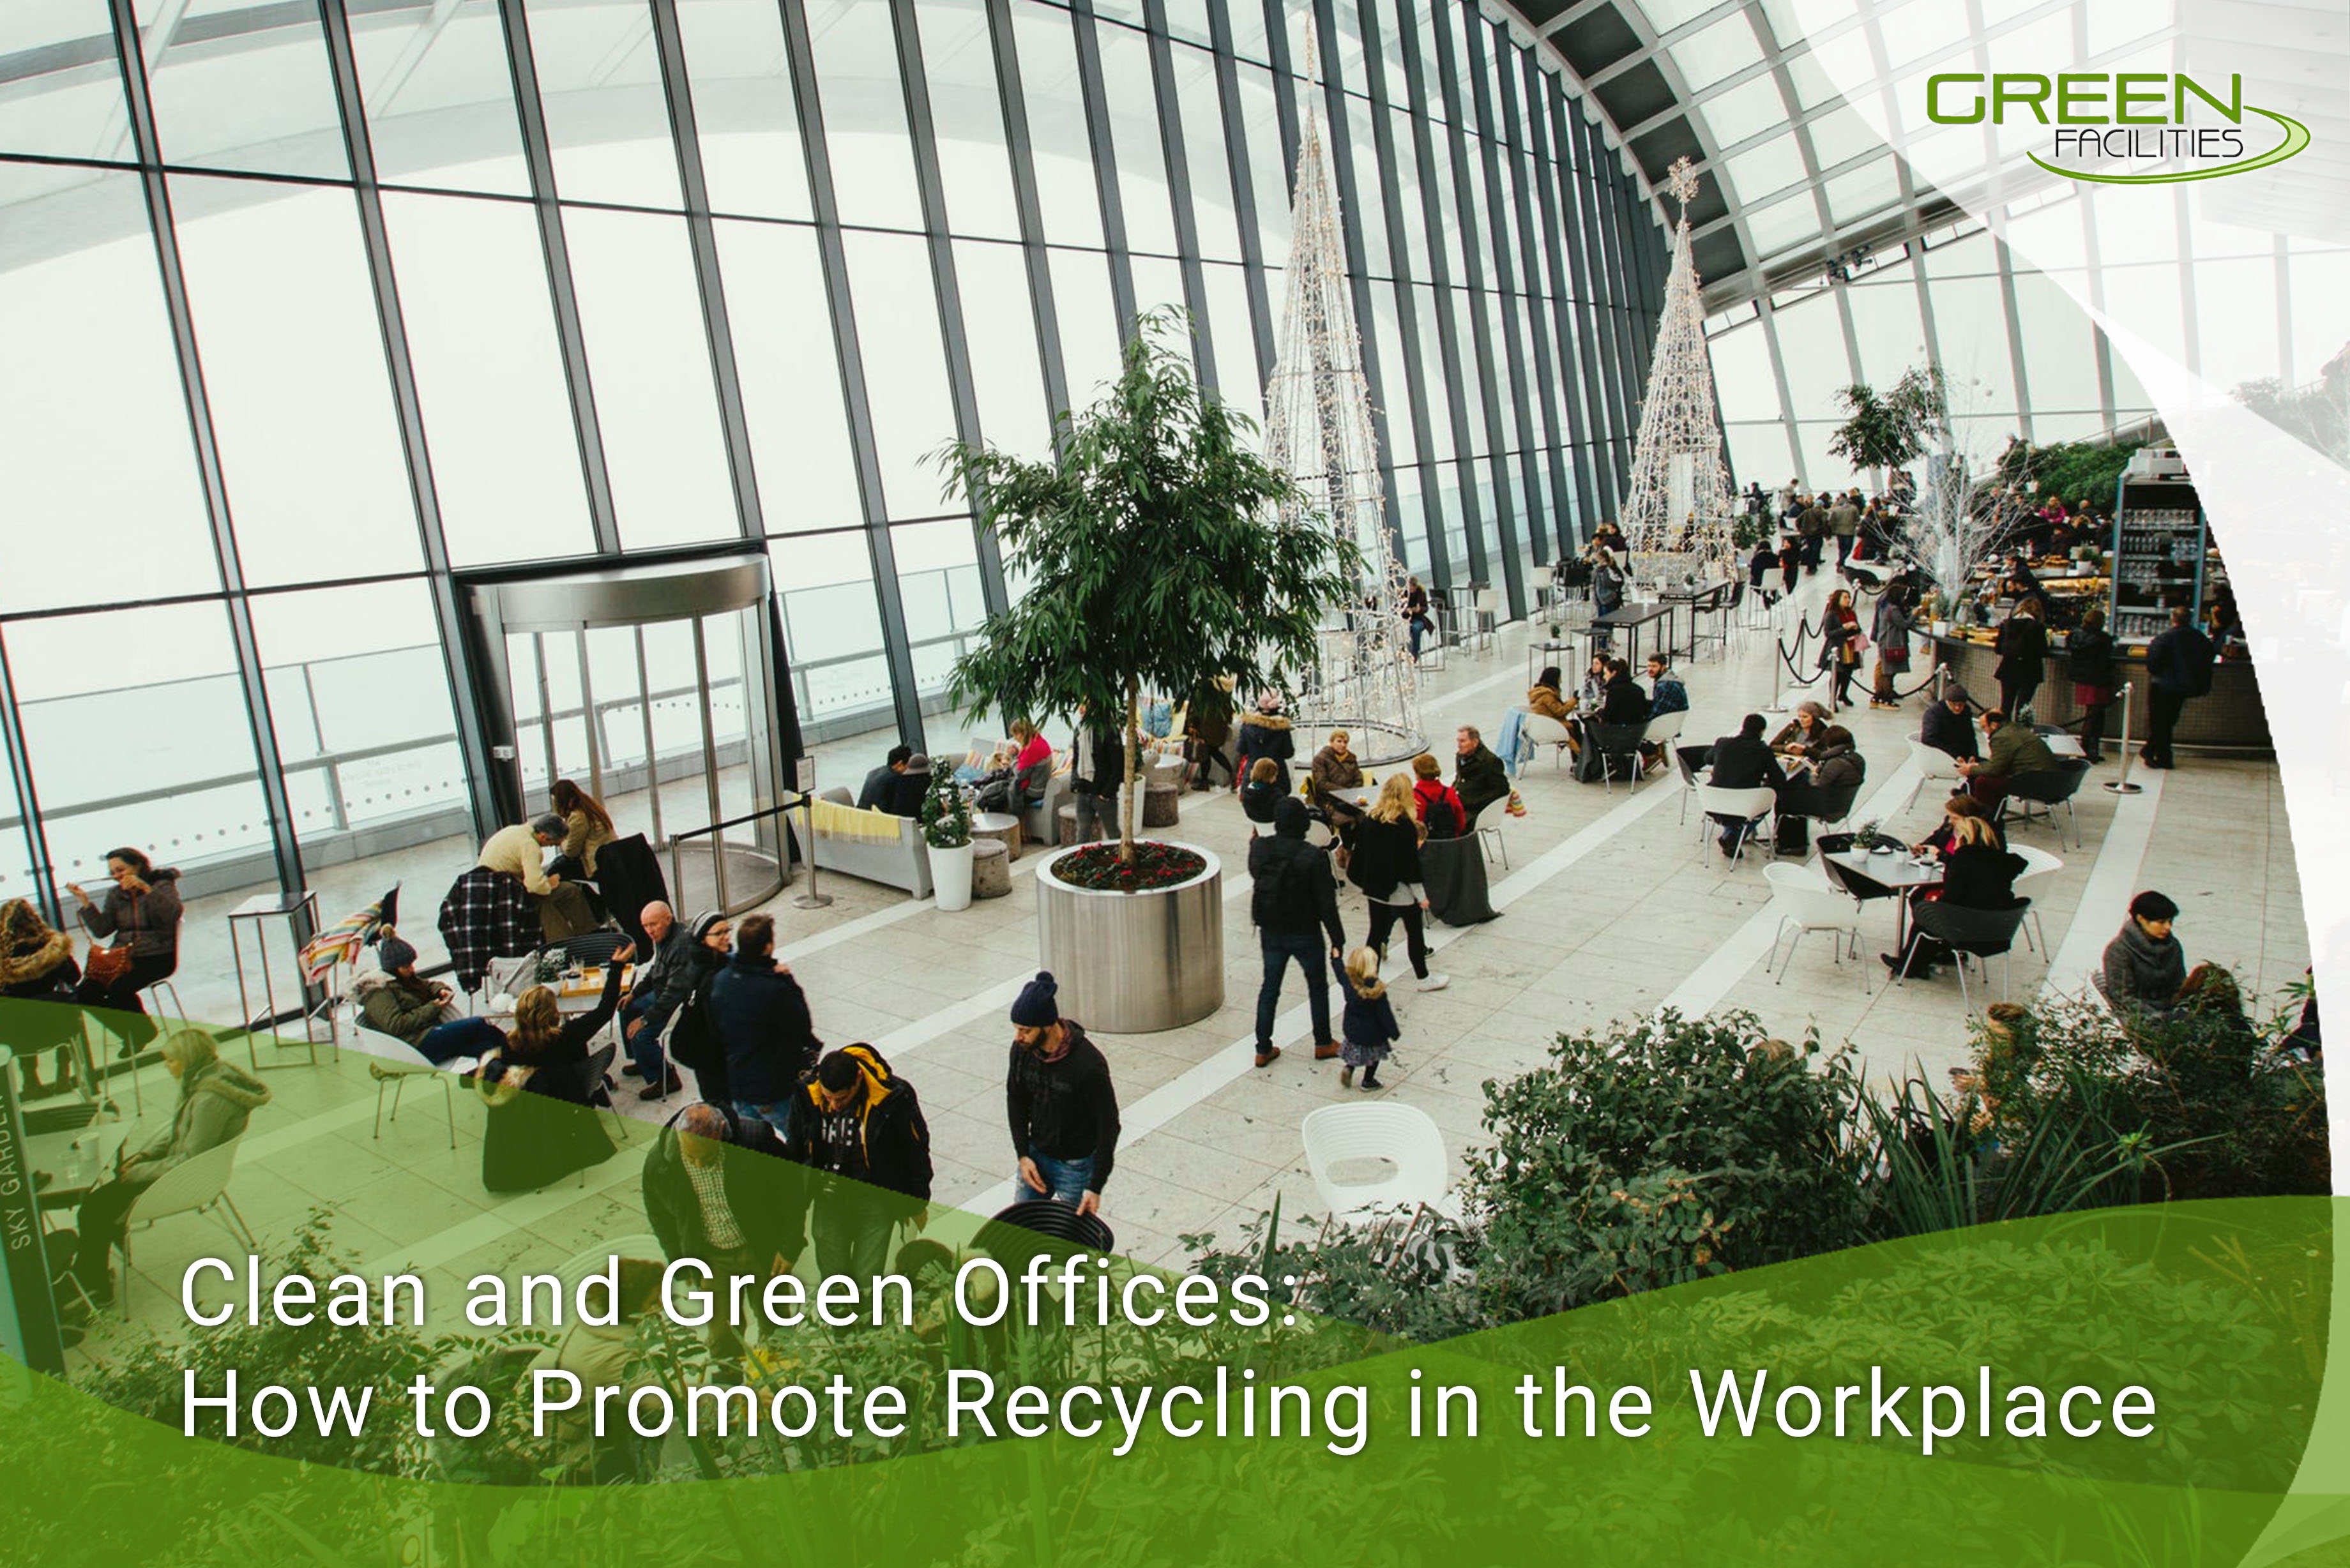 Clean and Green Offices: How to Promote Recycling in the Workplace